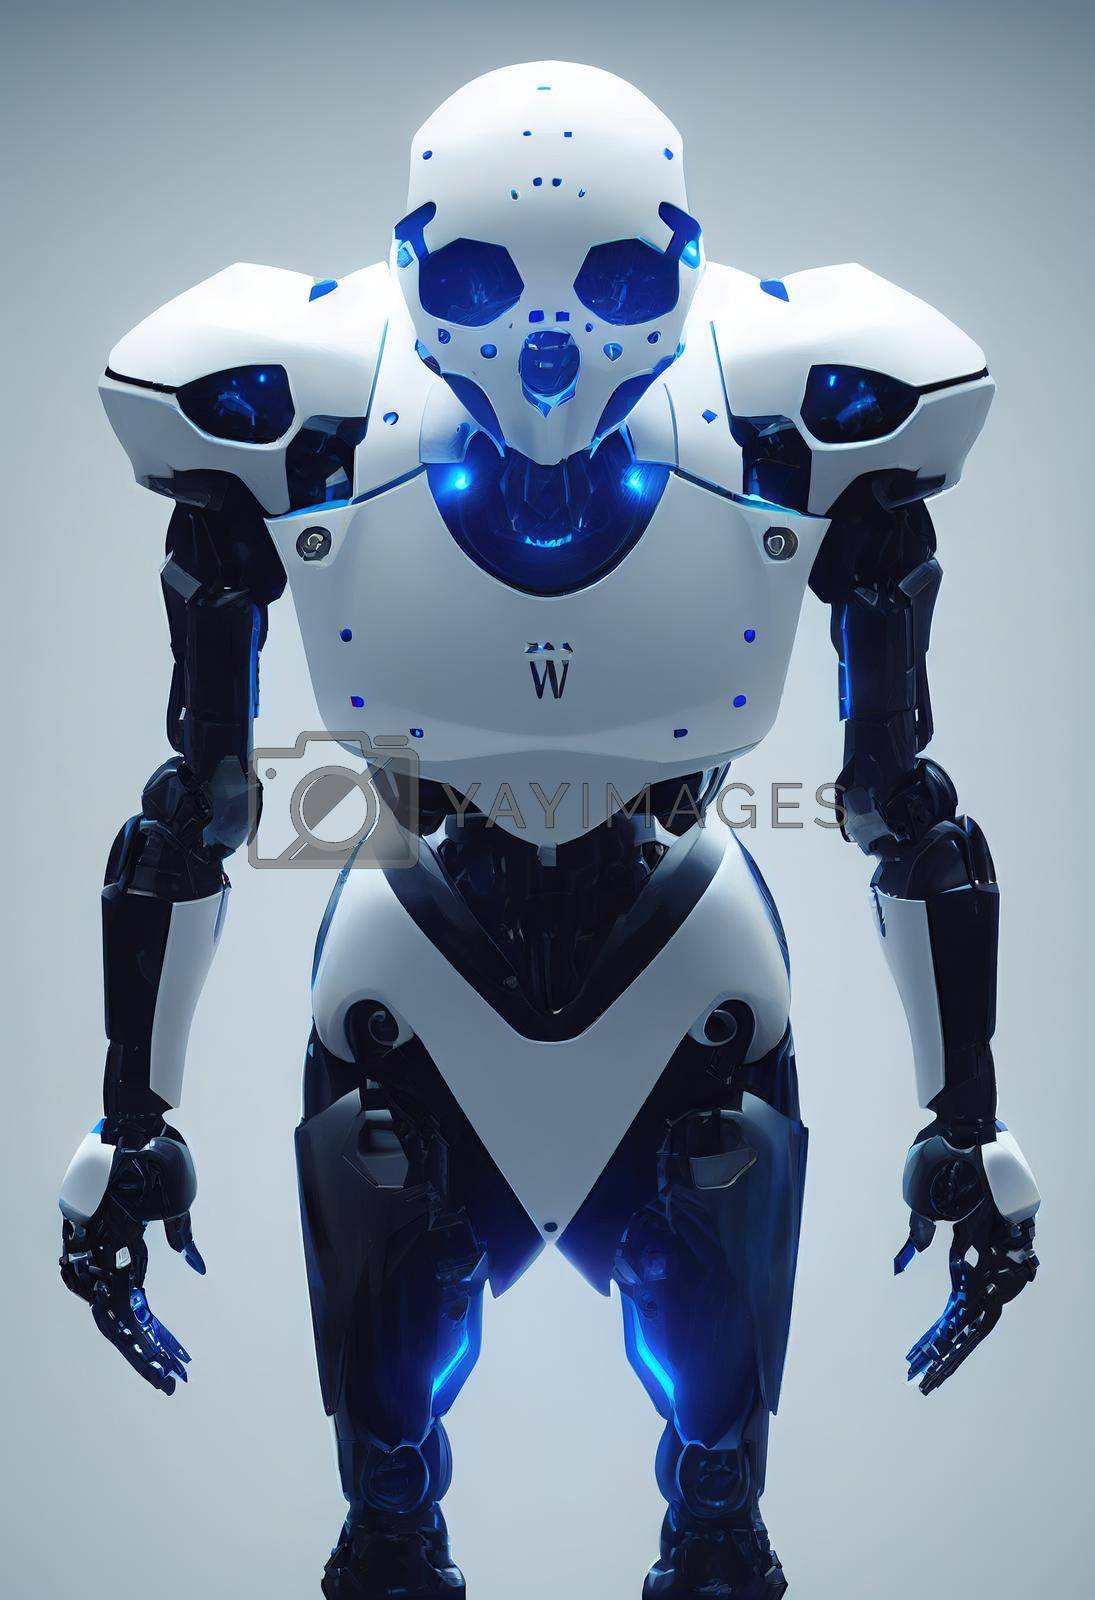 Royalty free image of futuristic robot white color in bright background by 2ragon